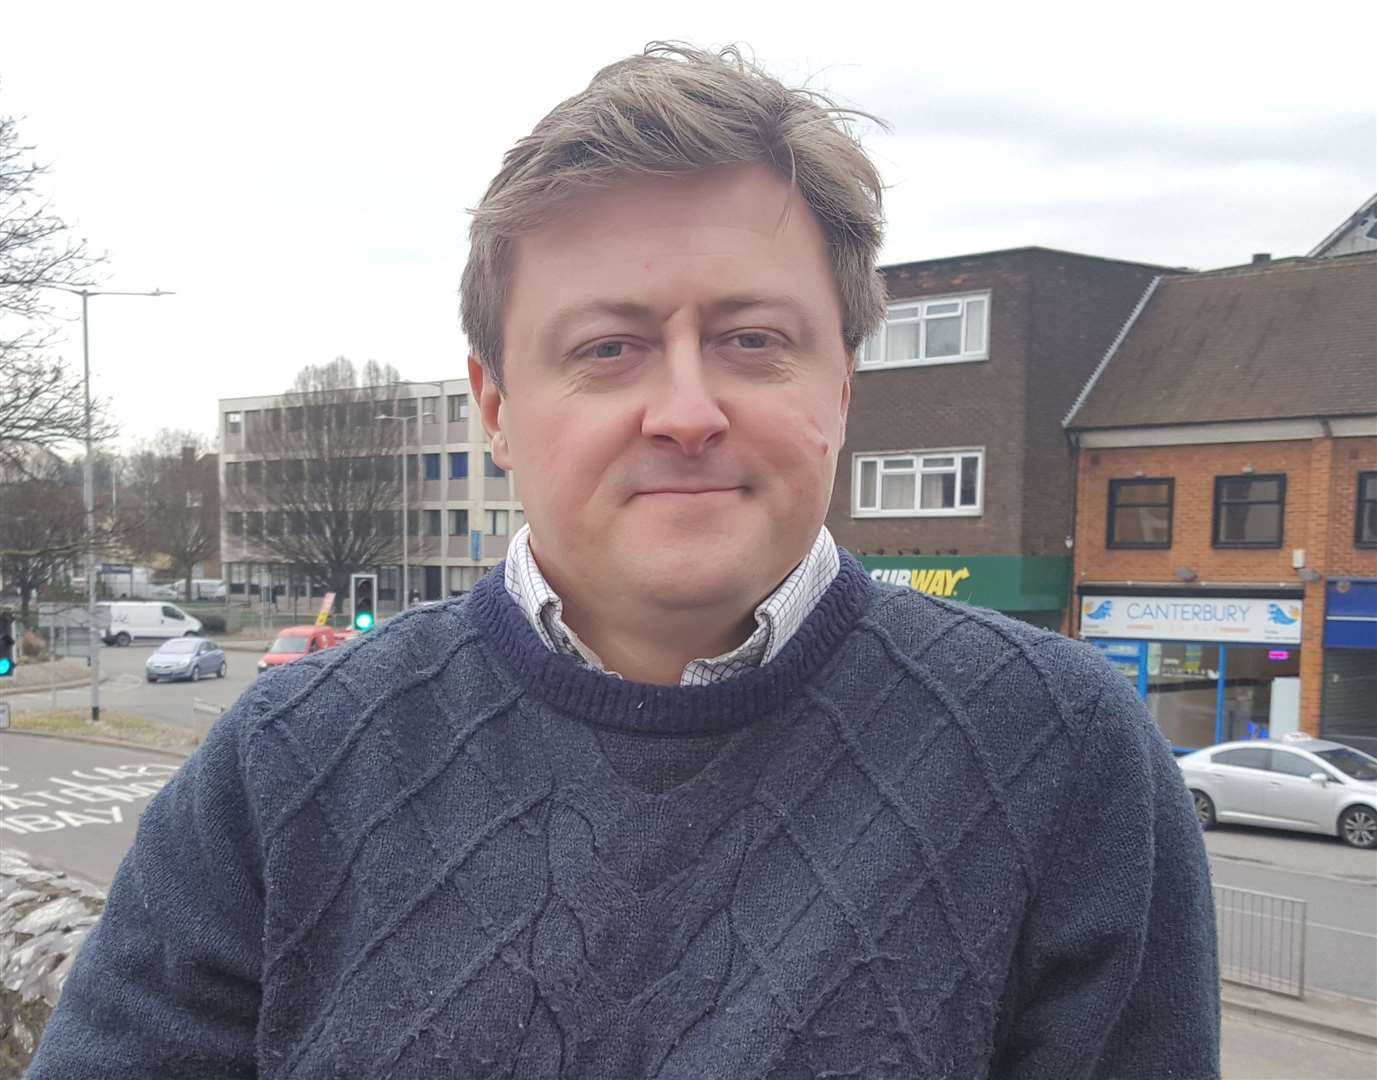 Canterbury Conservative Association chairman Greig Baker has stepped down for personal reasons